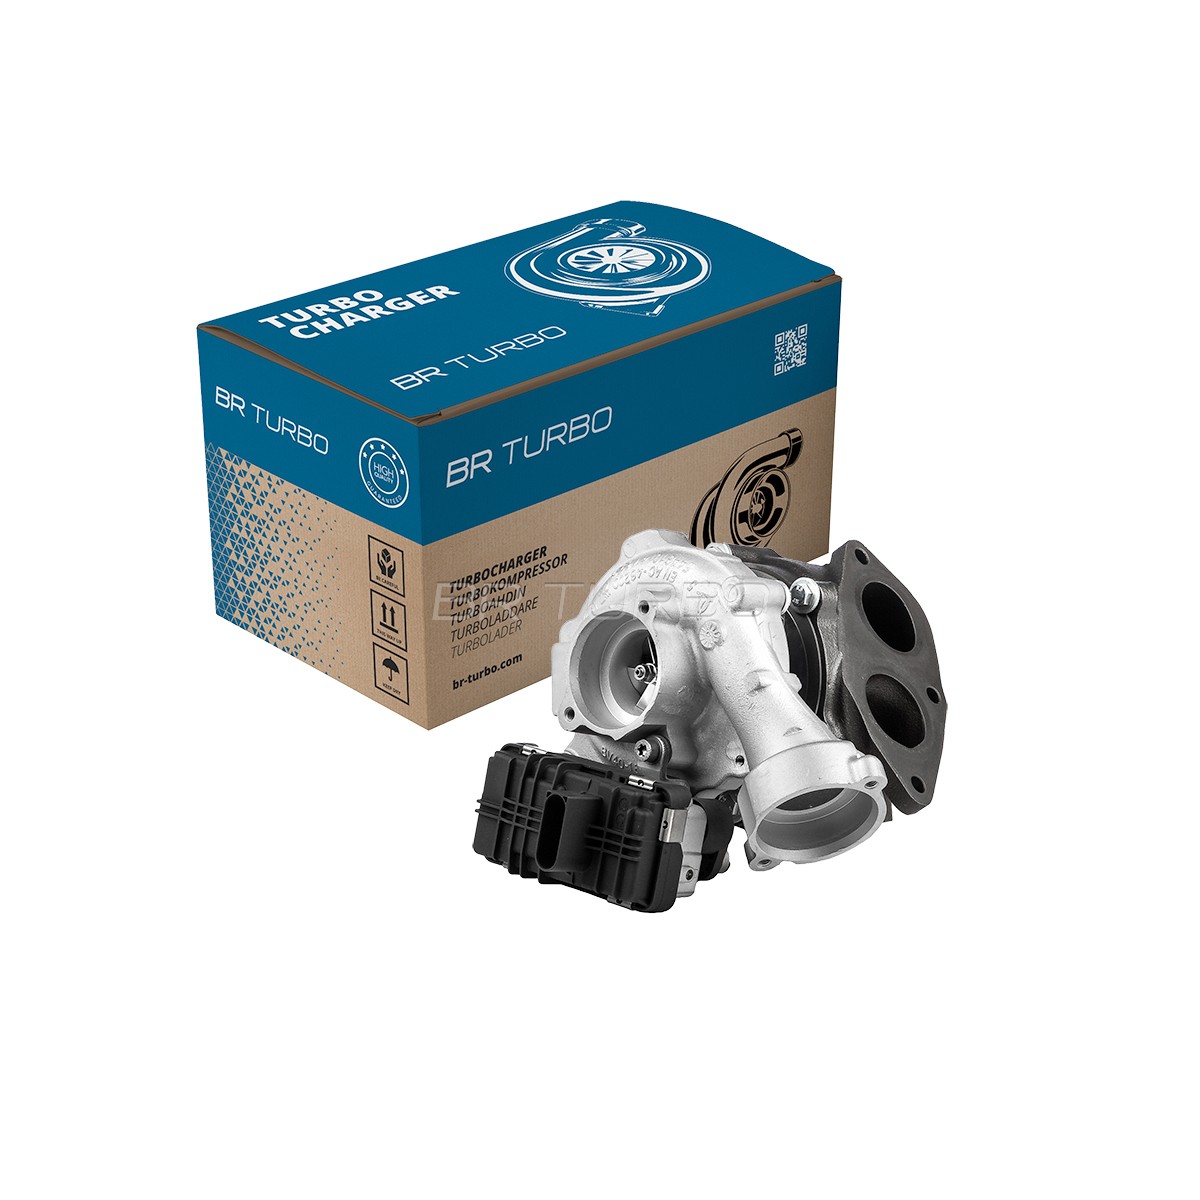 BMW X3 Turbocharger 19726131 BR Turbo 54409880026RS online buy